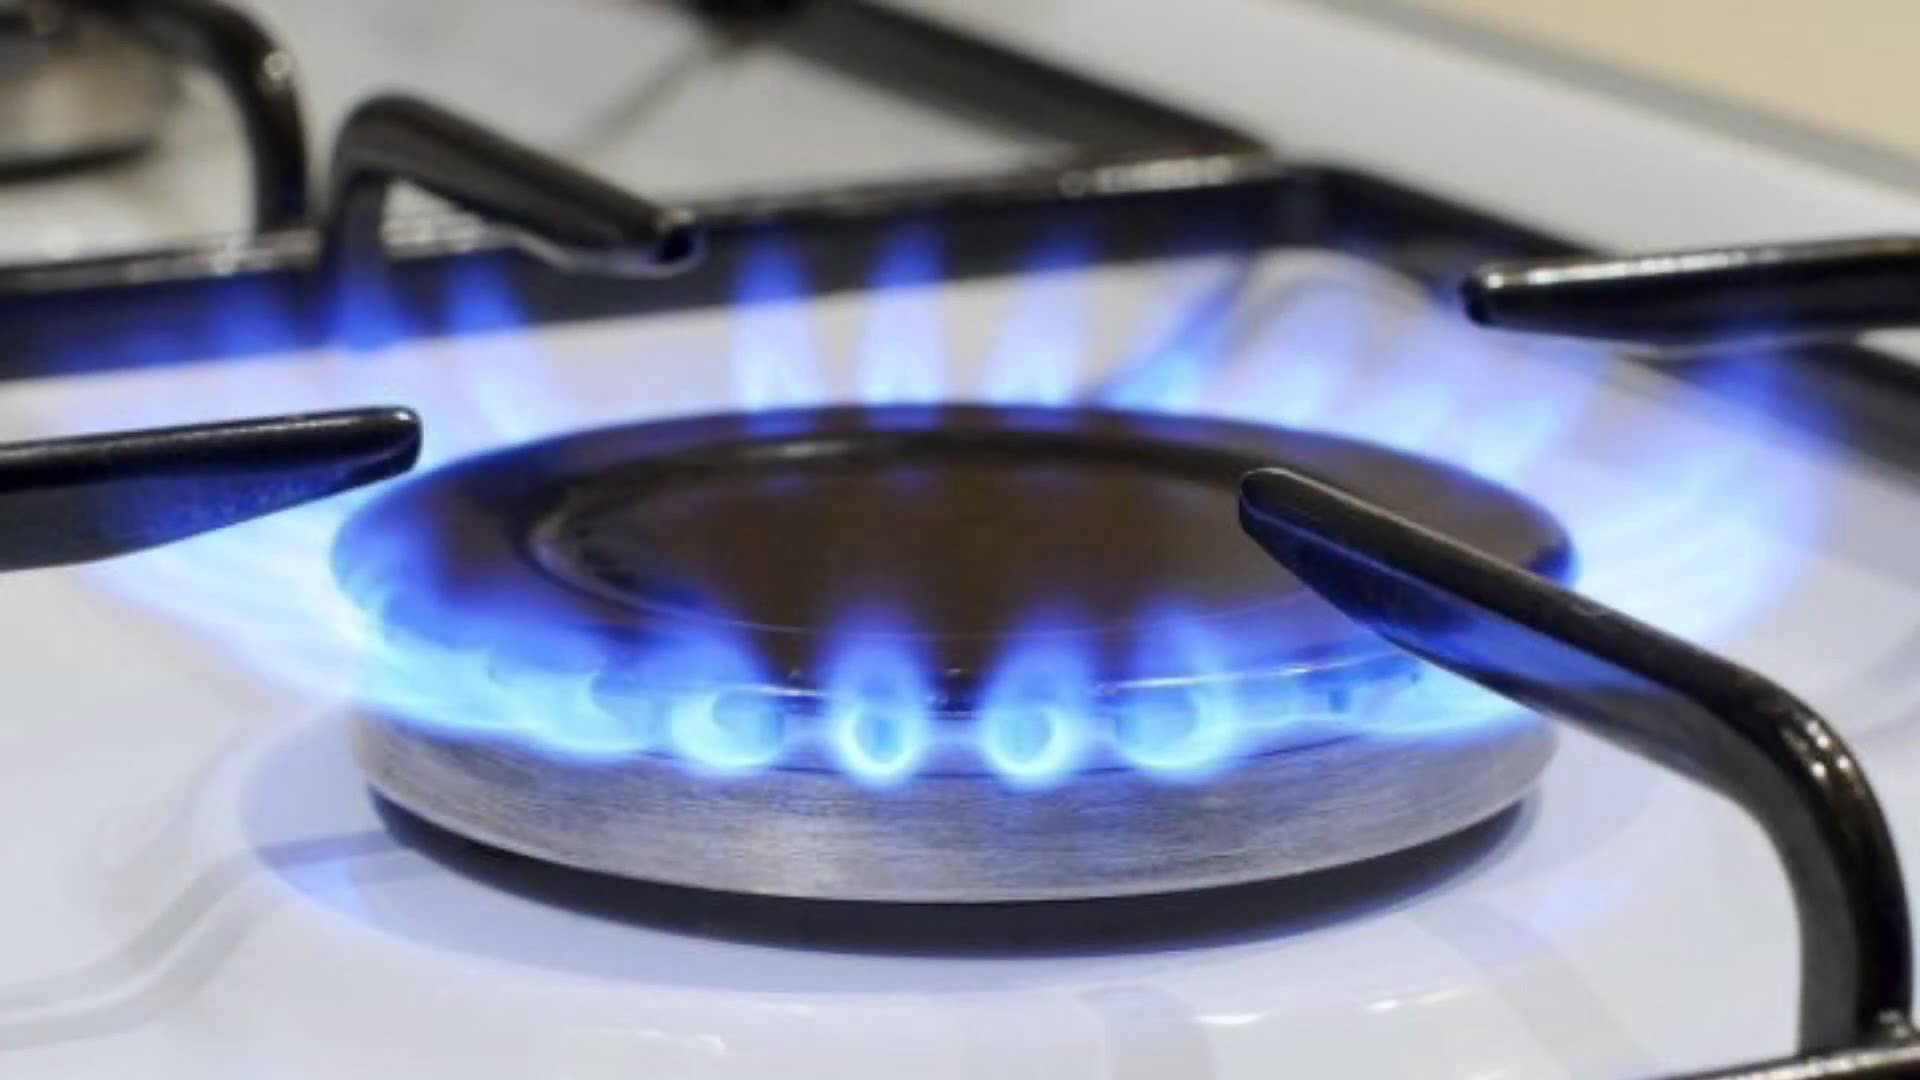 Ukrainians Already Pay For Gas Much More Than They Should